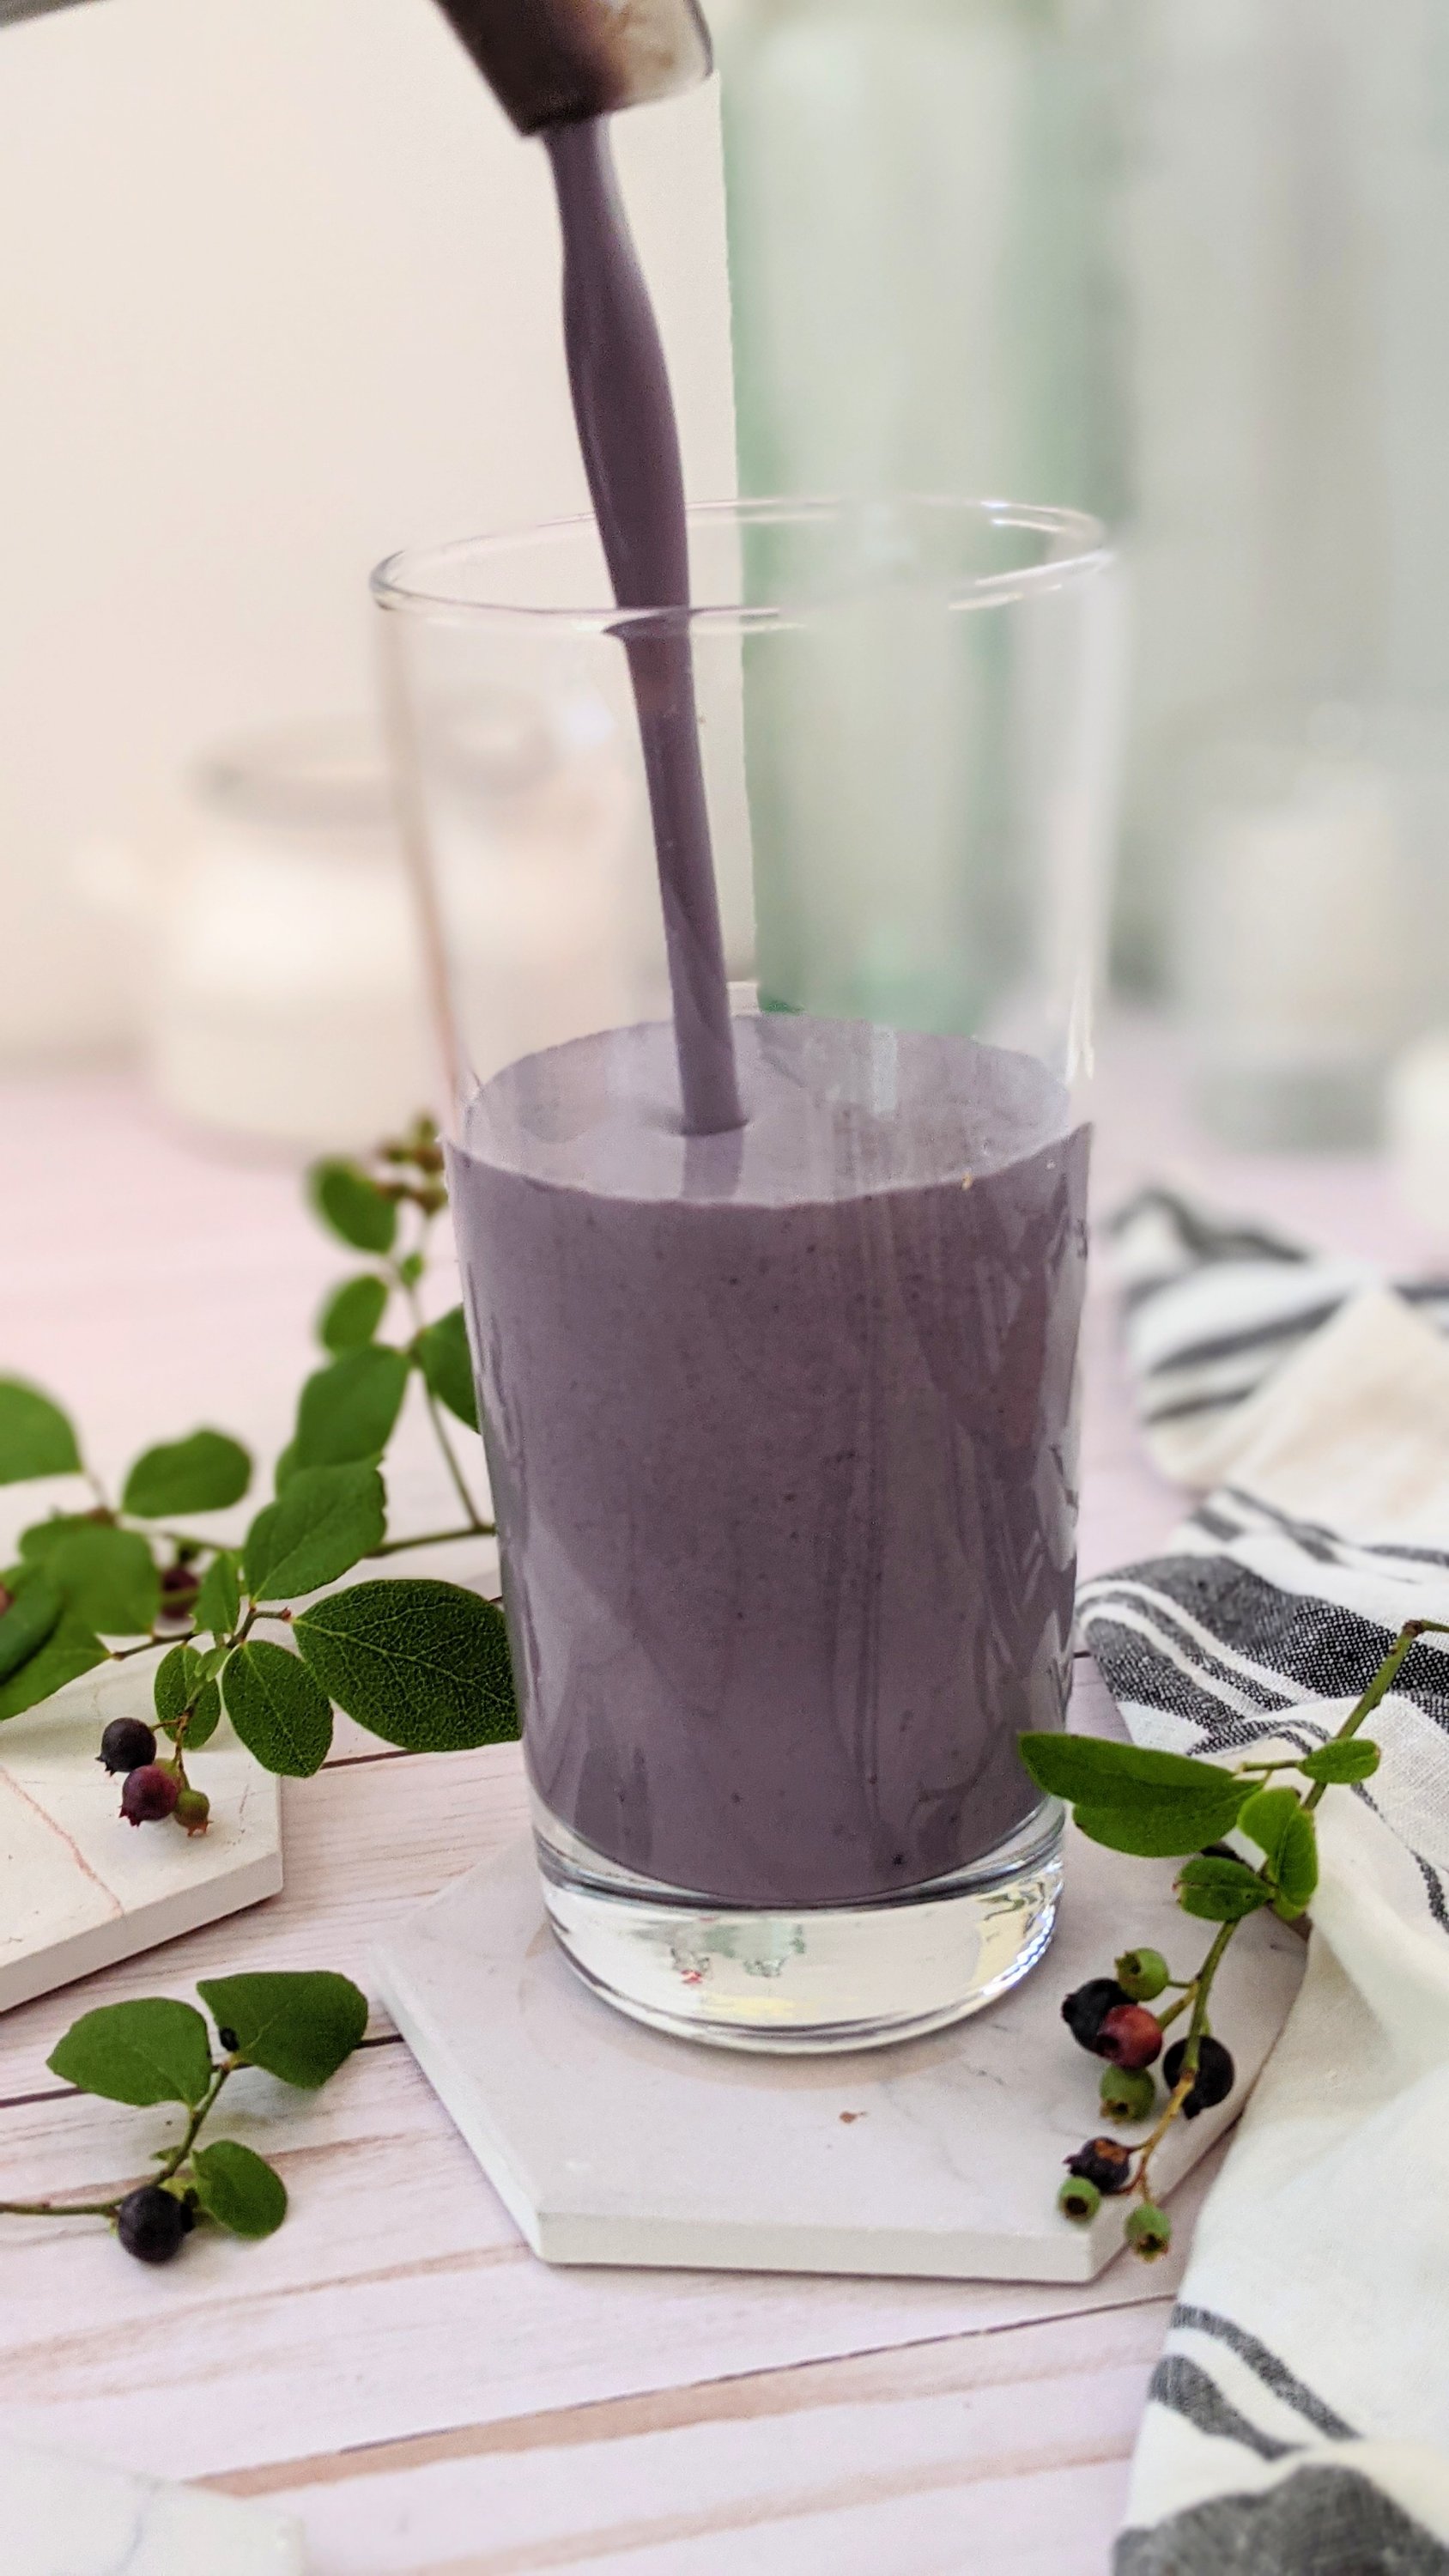 frozen blueberry smoothie with chocolate recipe vegan gluten free plant based berry chocolate smoothies easy simple high protein vegan smoothies with frozen blueberries and chocolate protein vegan powder